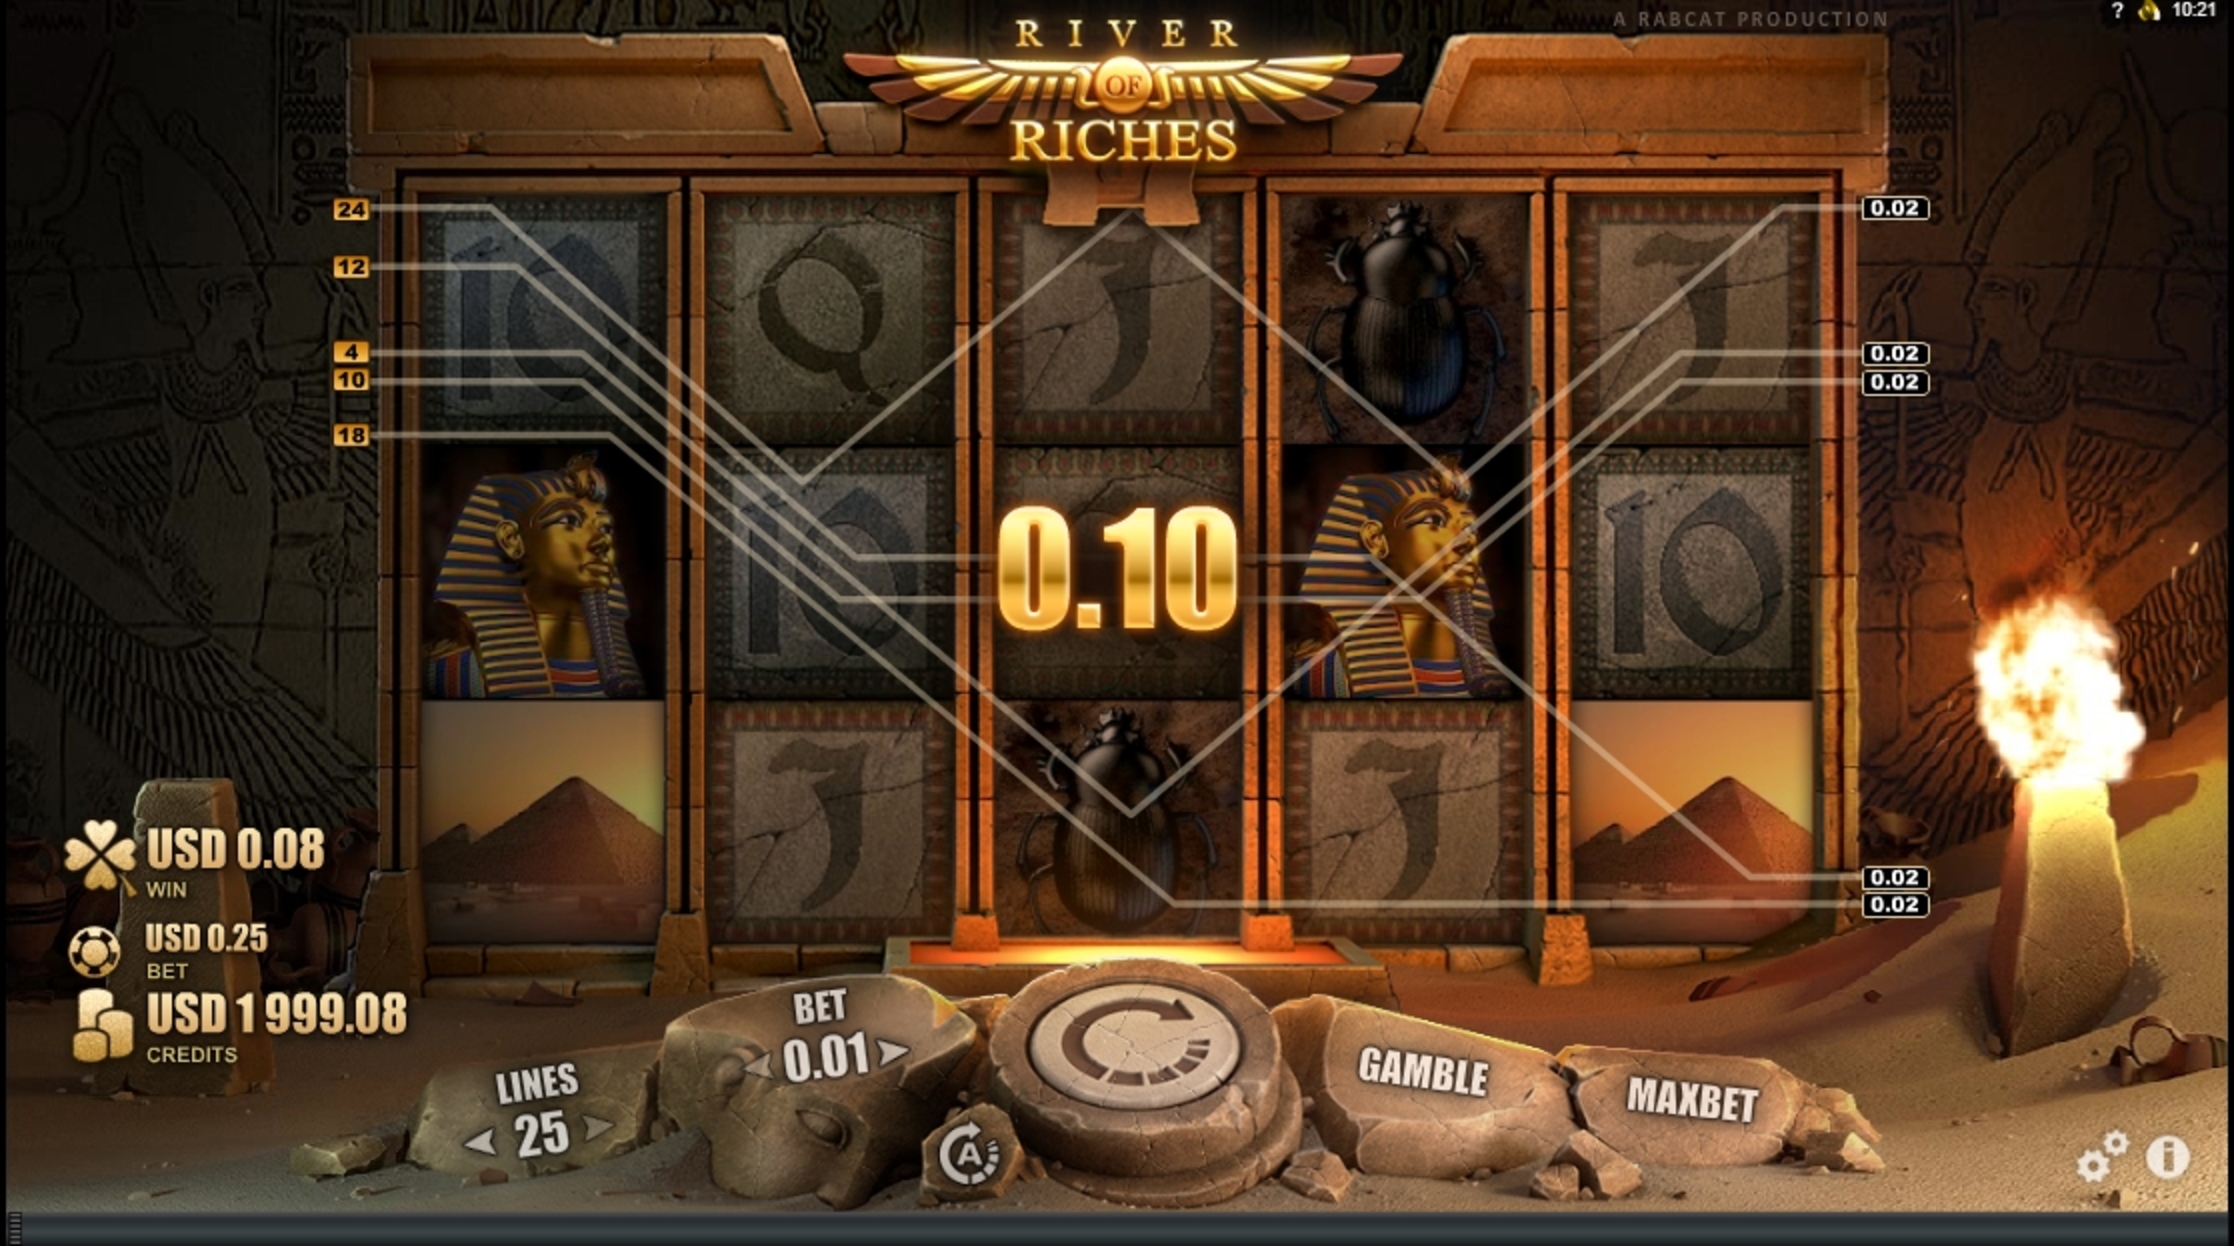 Win Money in River of Riches Free Slot Game by Rabcat